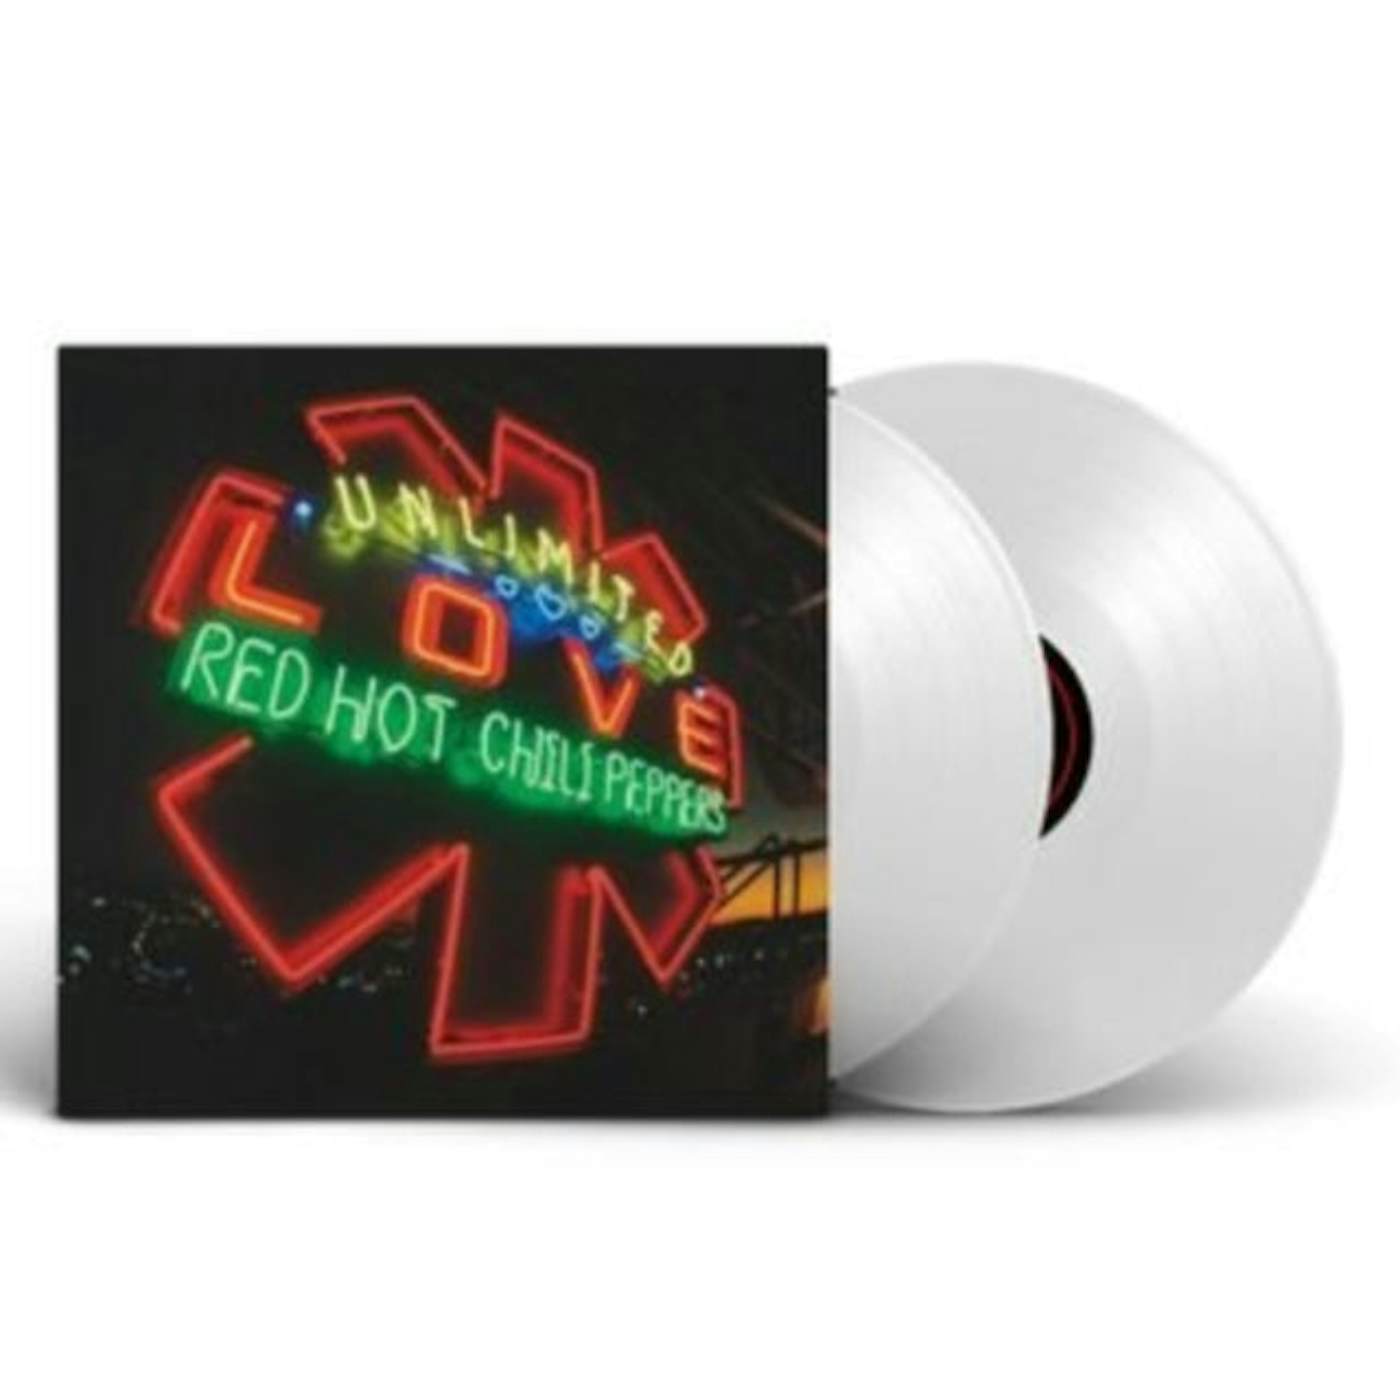 Red Hot Chili Peppers LP Vinyl Record - Unlimited Love (White Vinyl)